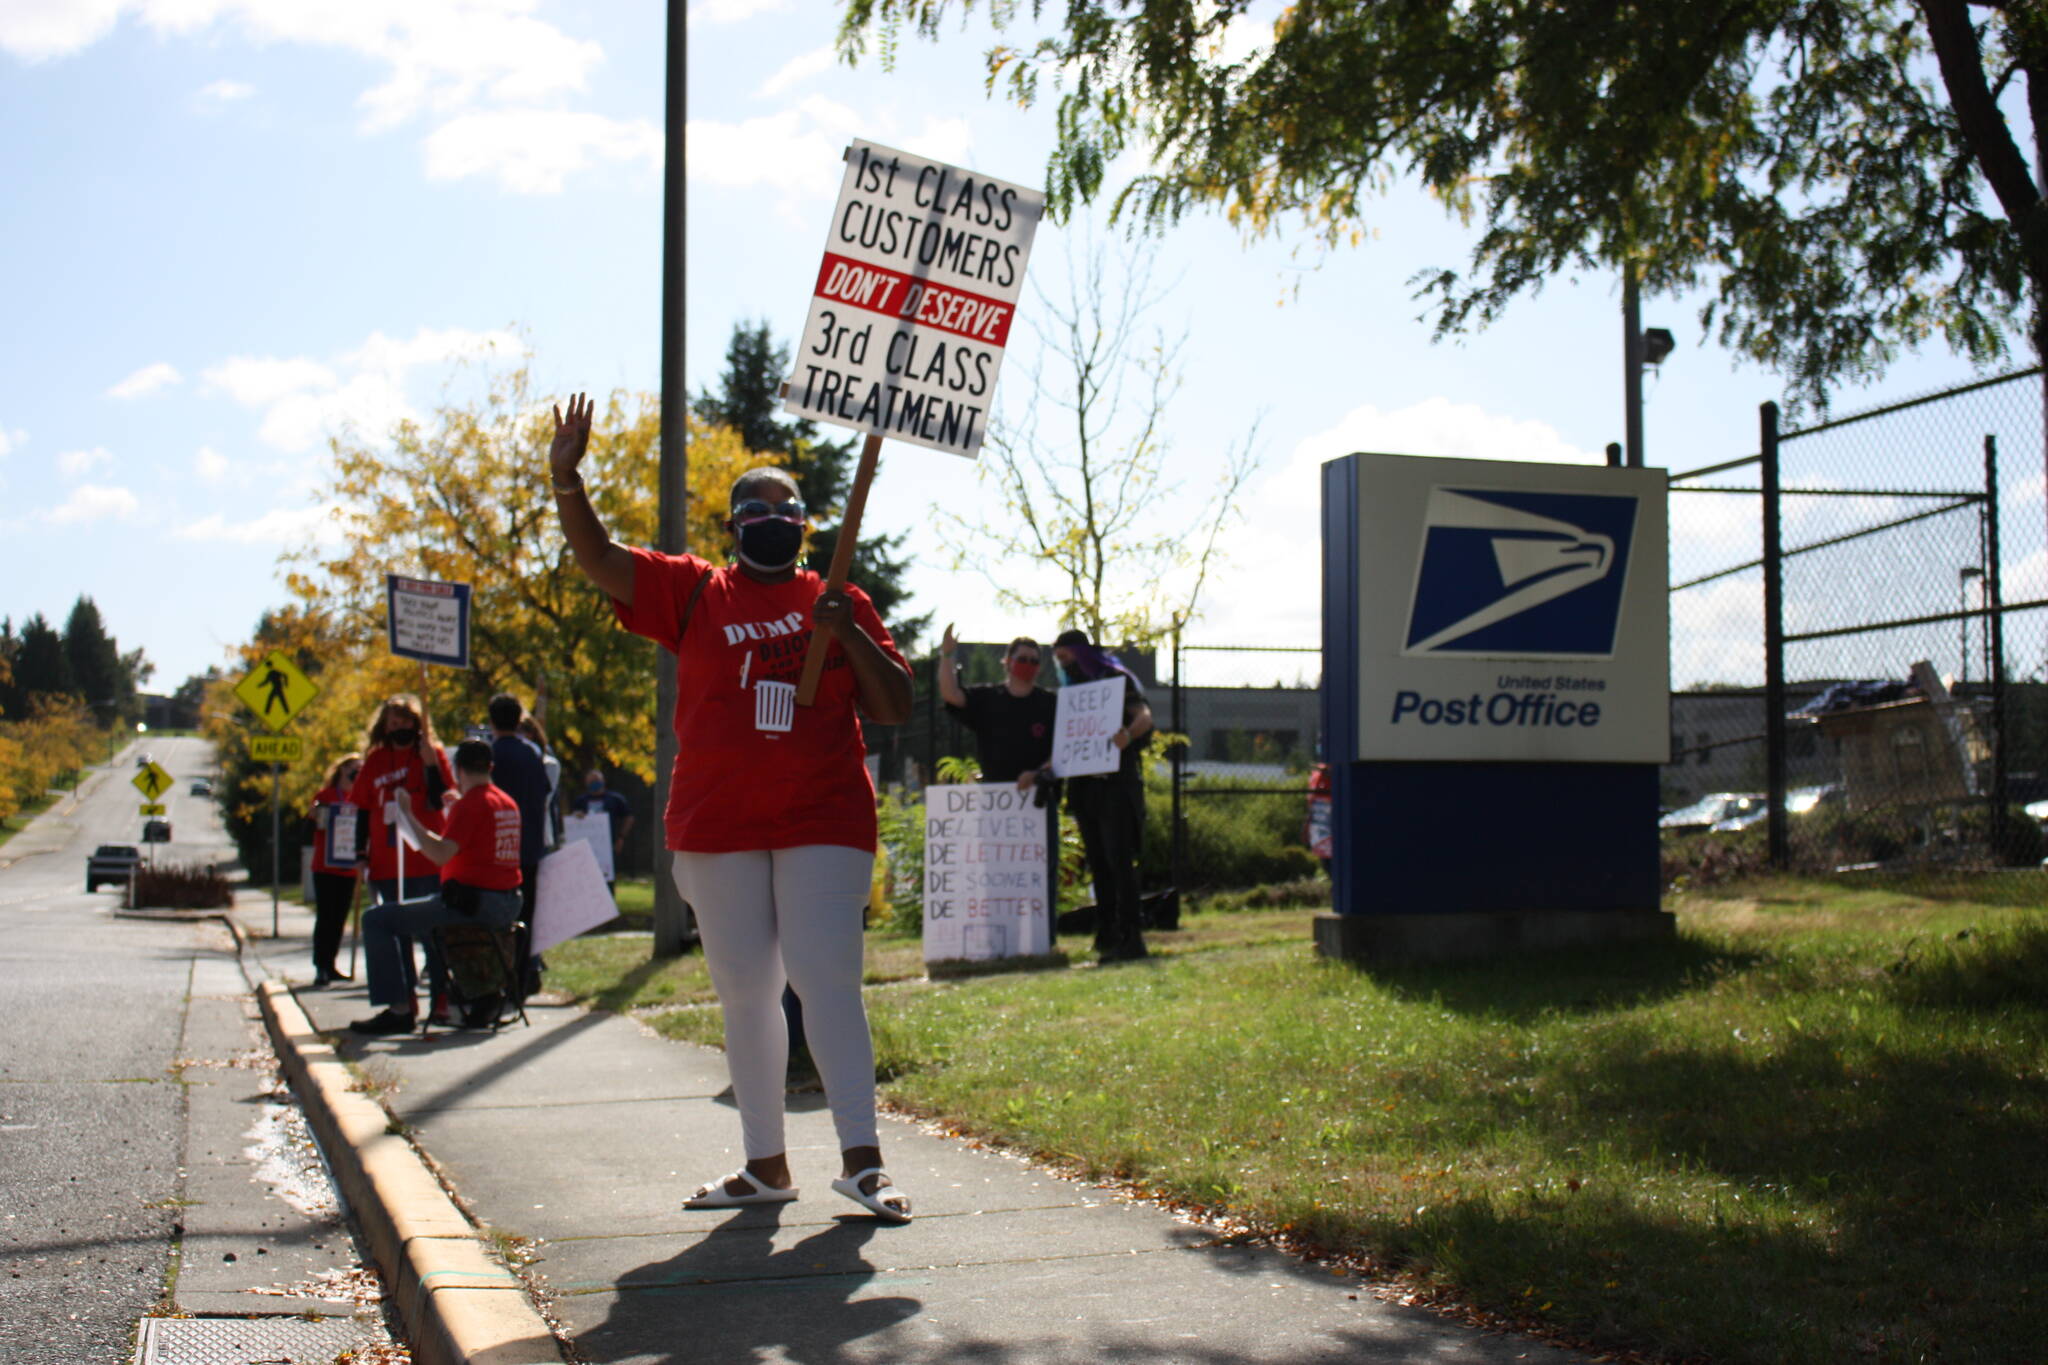 Picketers in front of East DDC (photo credit: Cameron Sheppard)